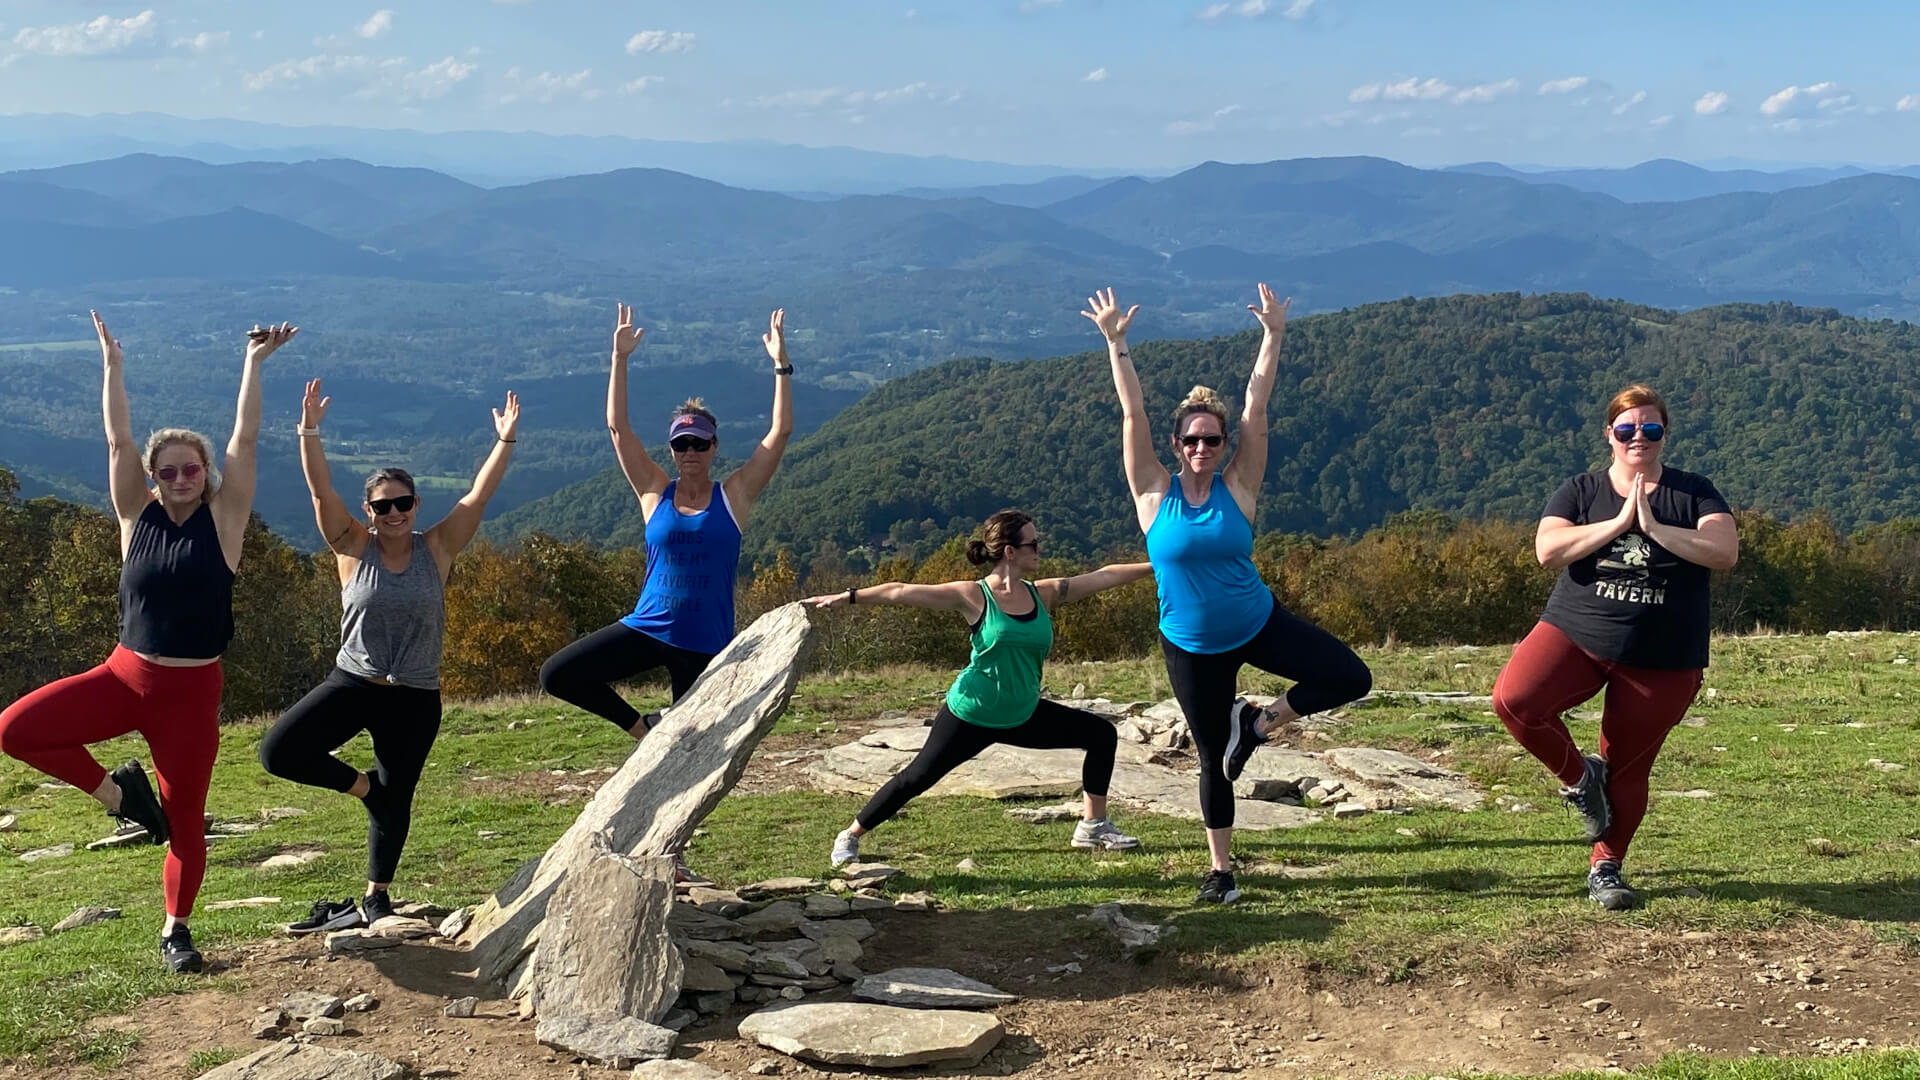 Women in various yoga poses on yoga hike on mountaintop in Asheville, NC.